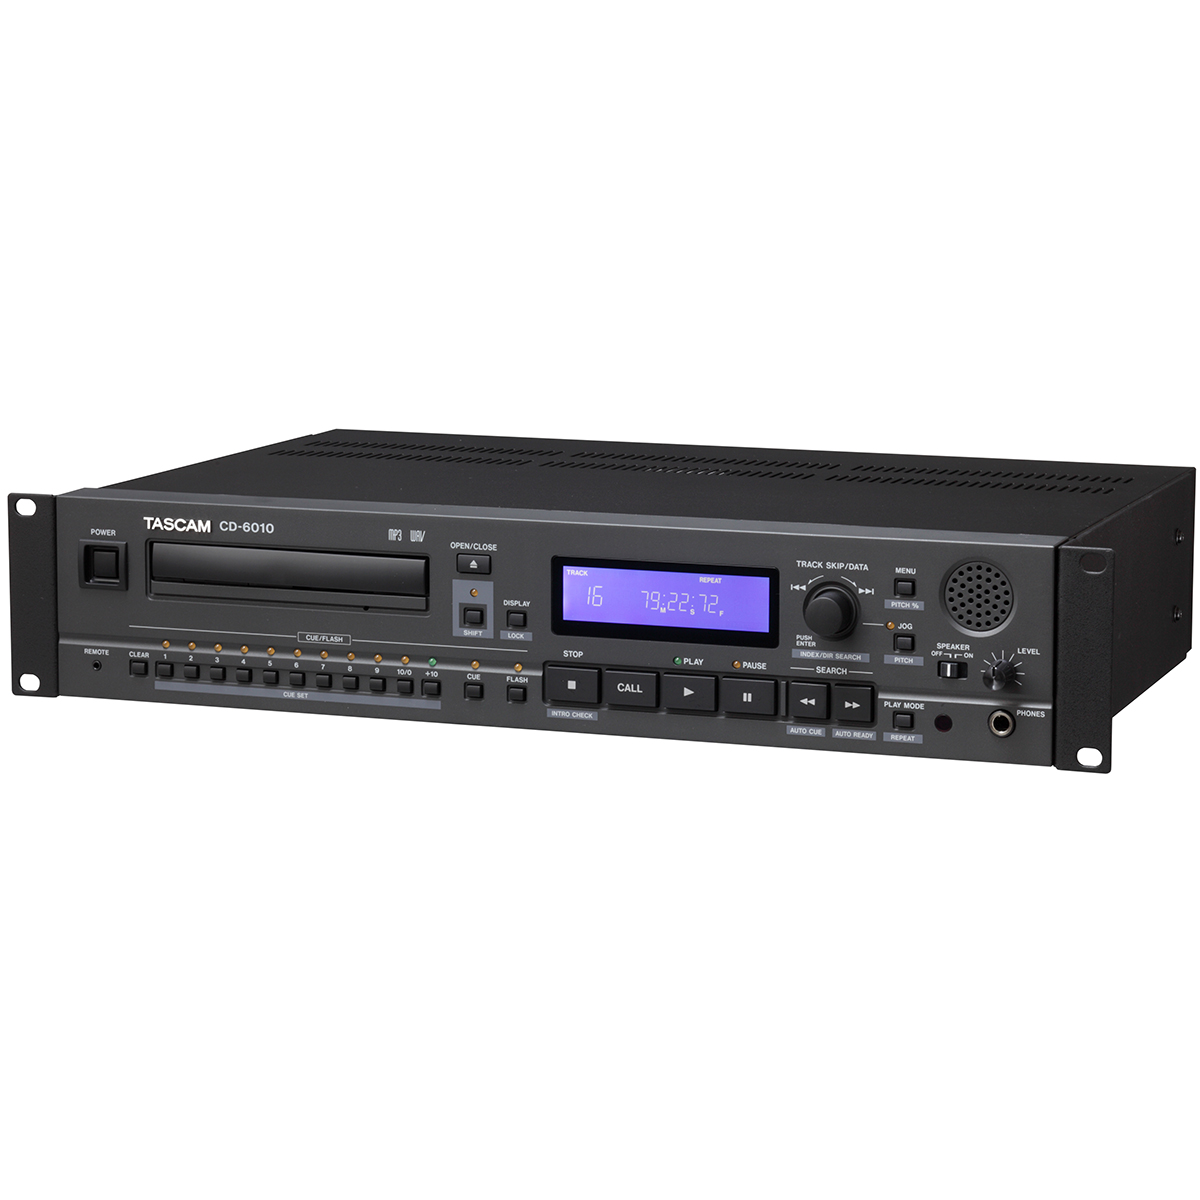 Tascam CD-6010 - Reproductor CD/Mp3 profesional